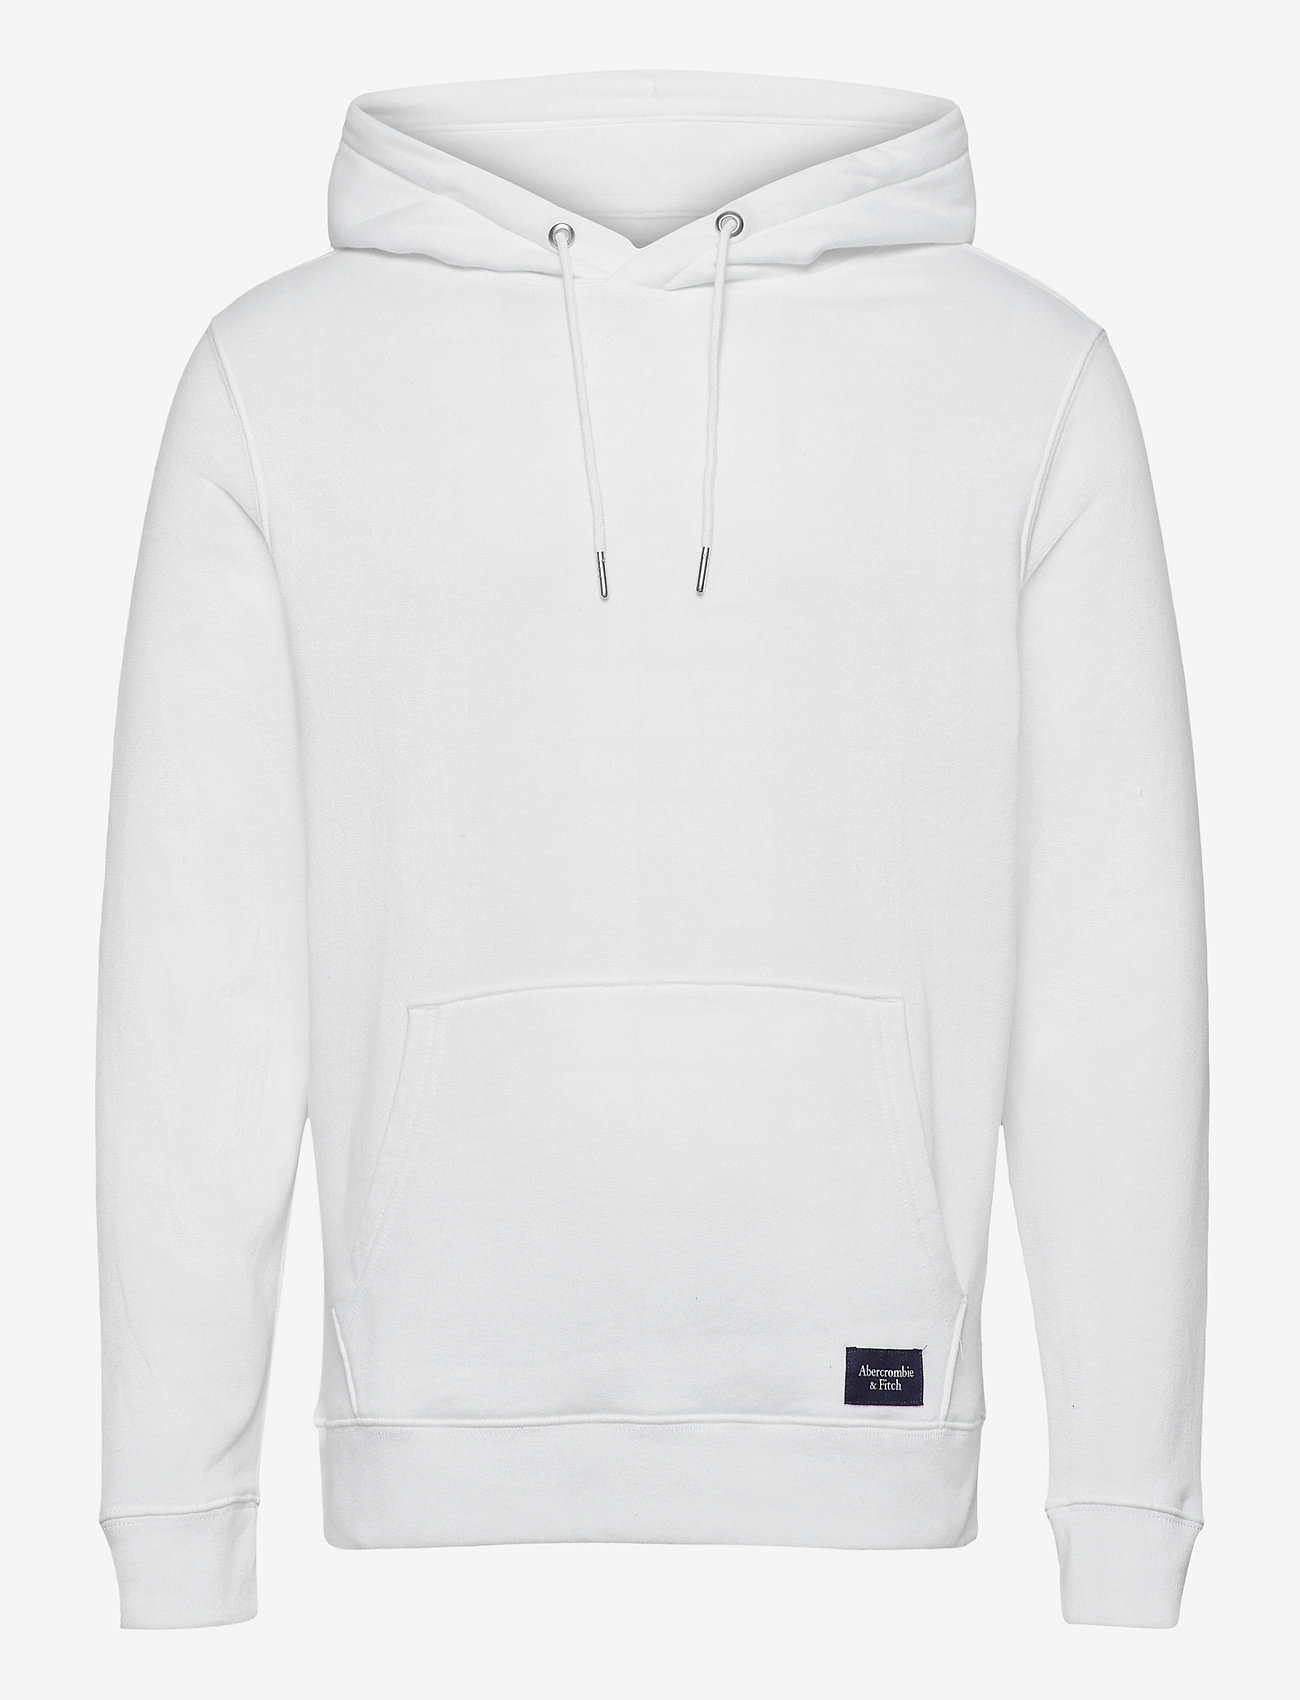 abercrombie and fitch white hoodie